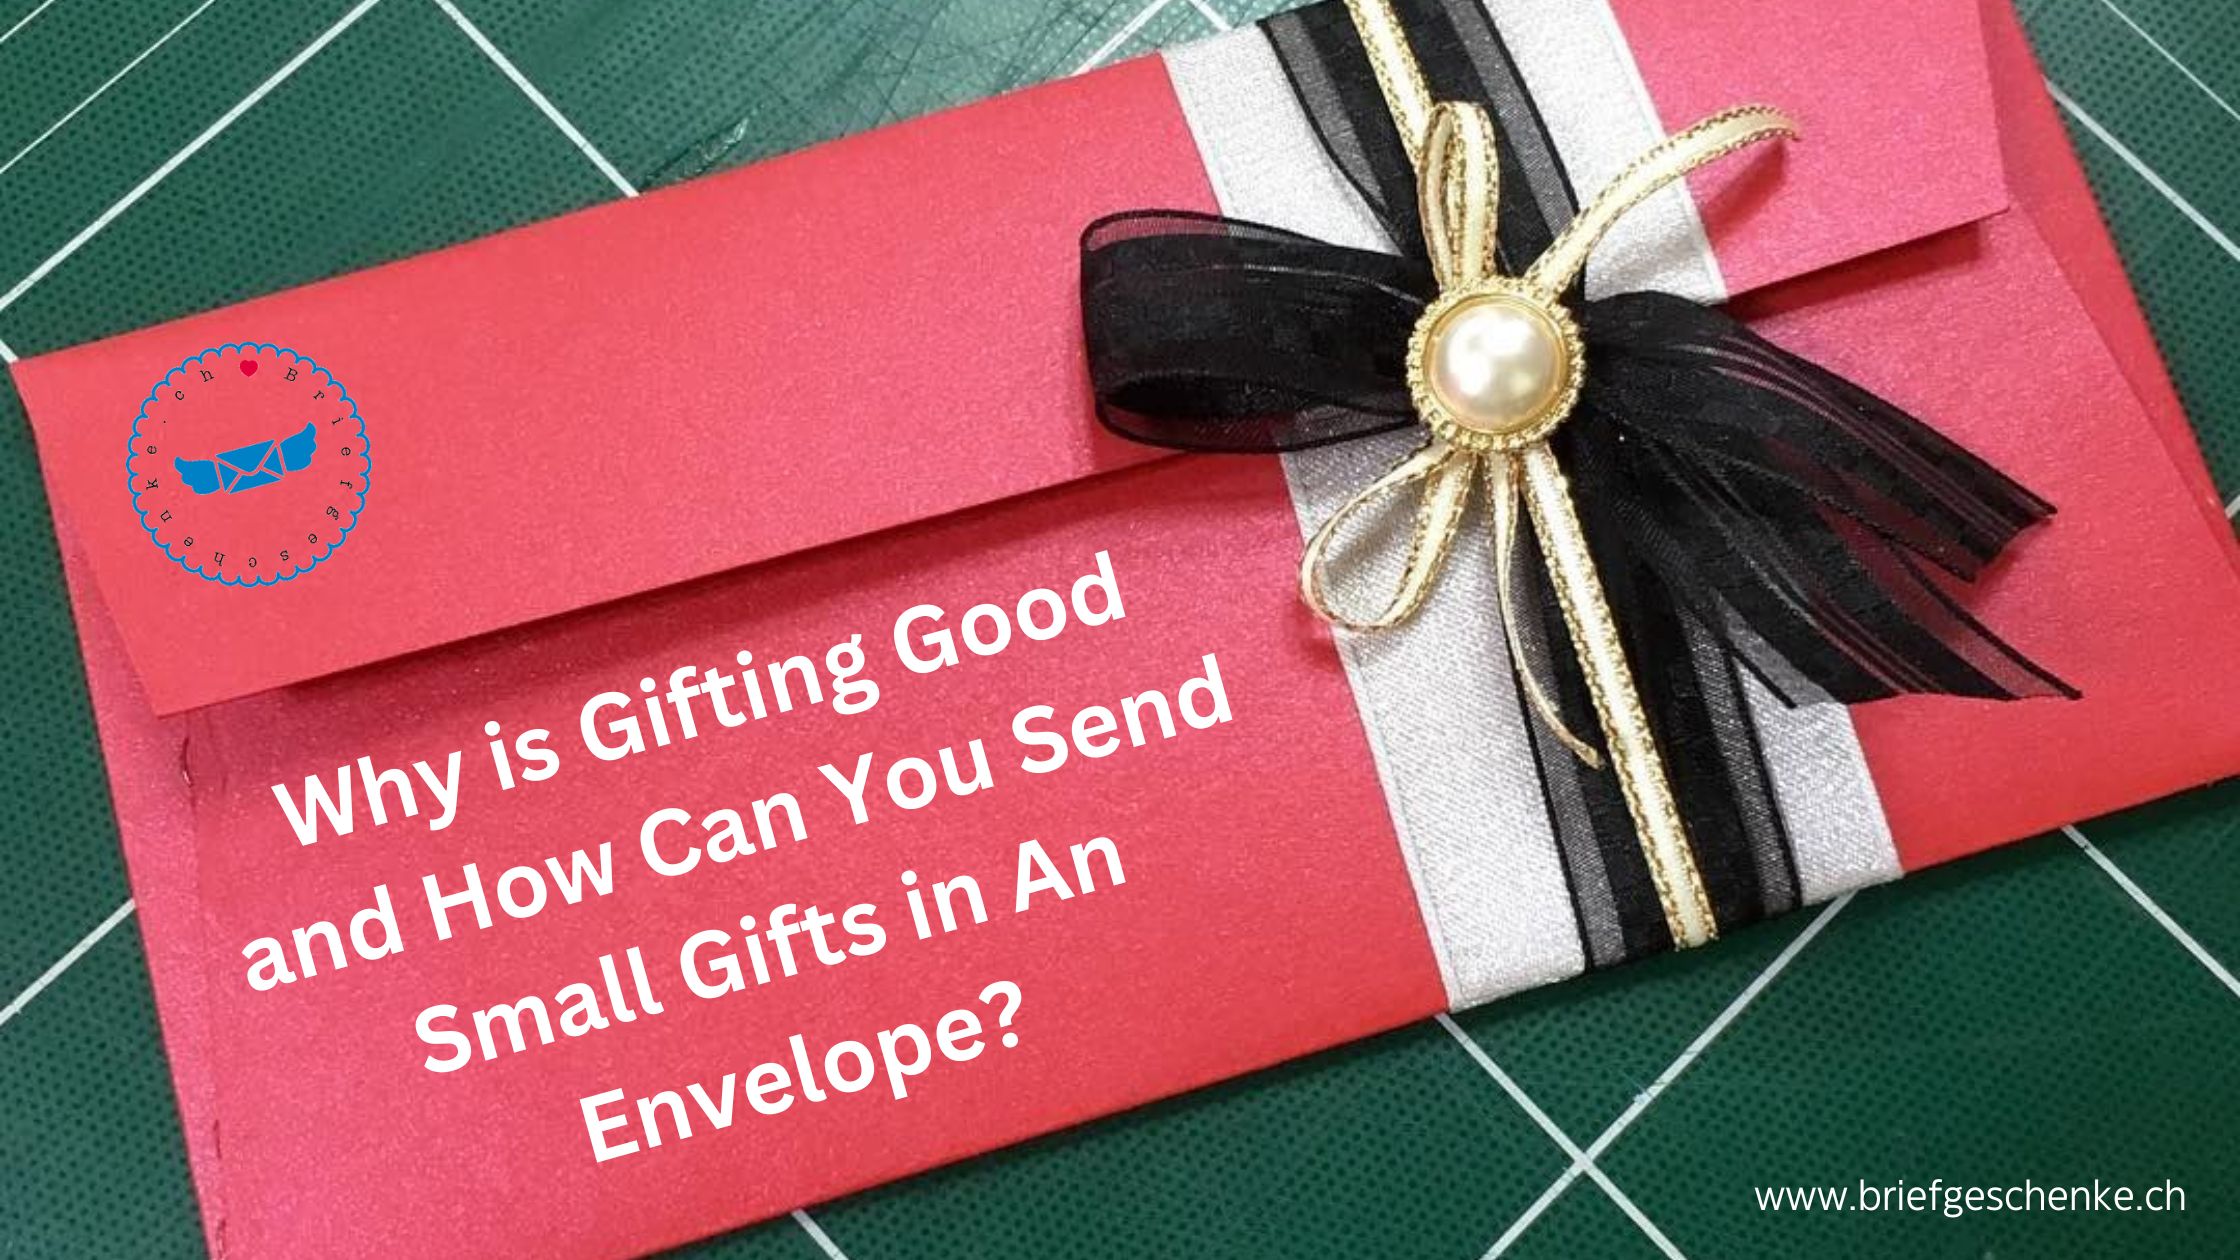 Small Gifts in An Envelope | Gifts By Post - Briefgeschenke